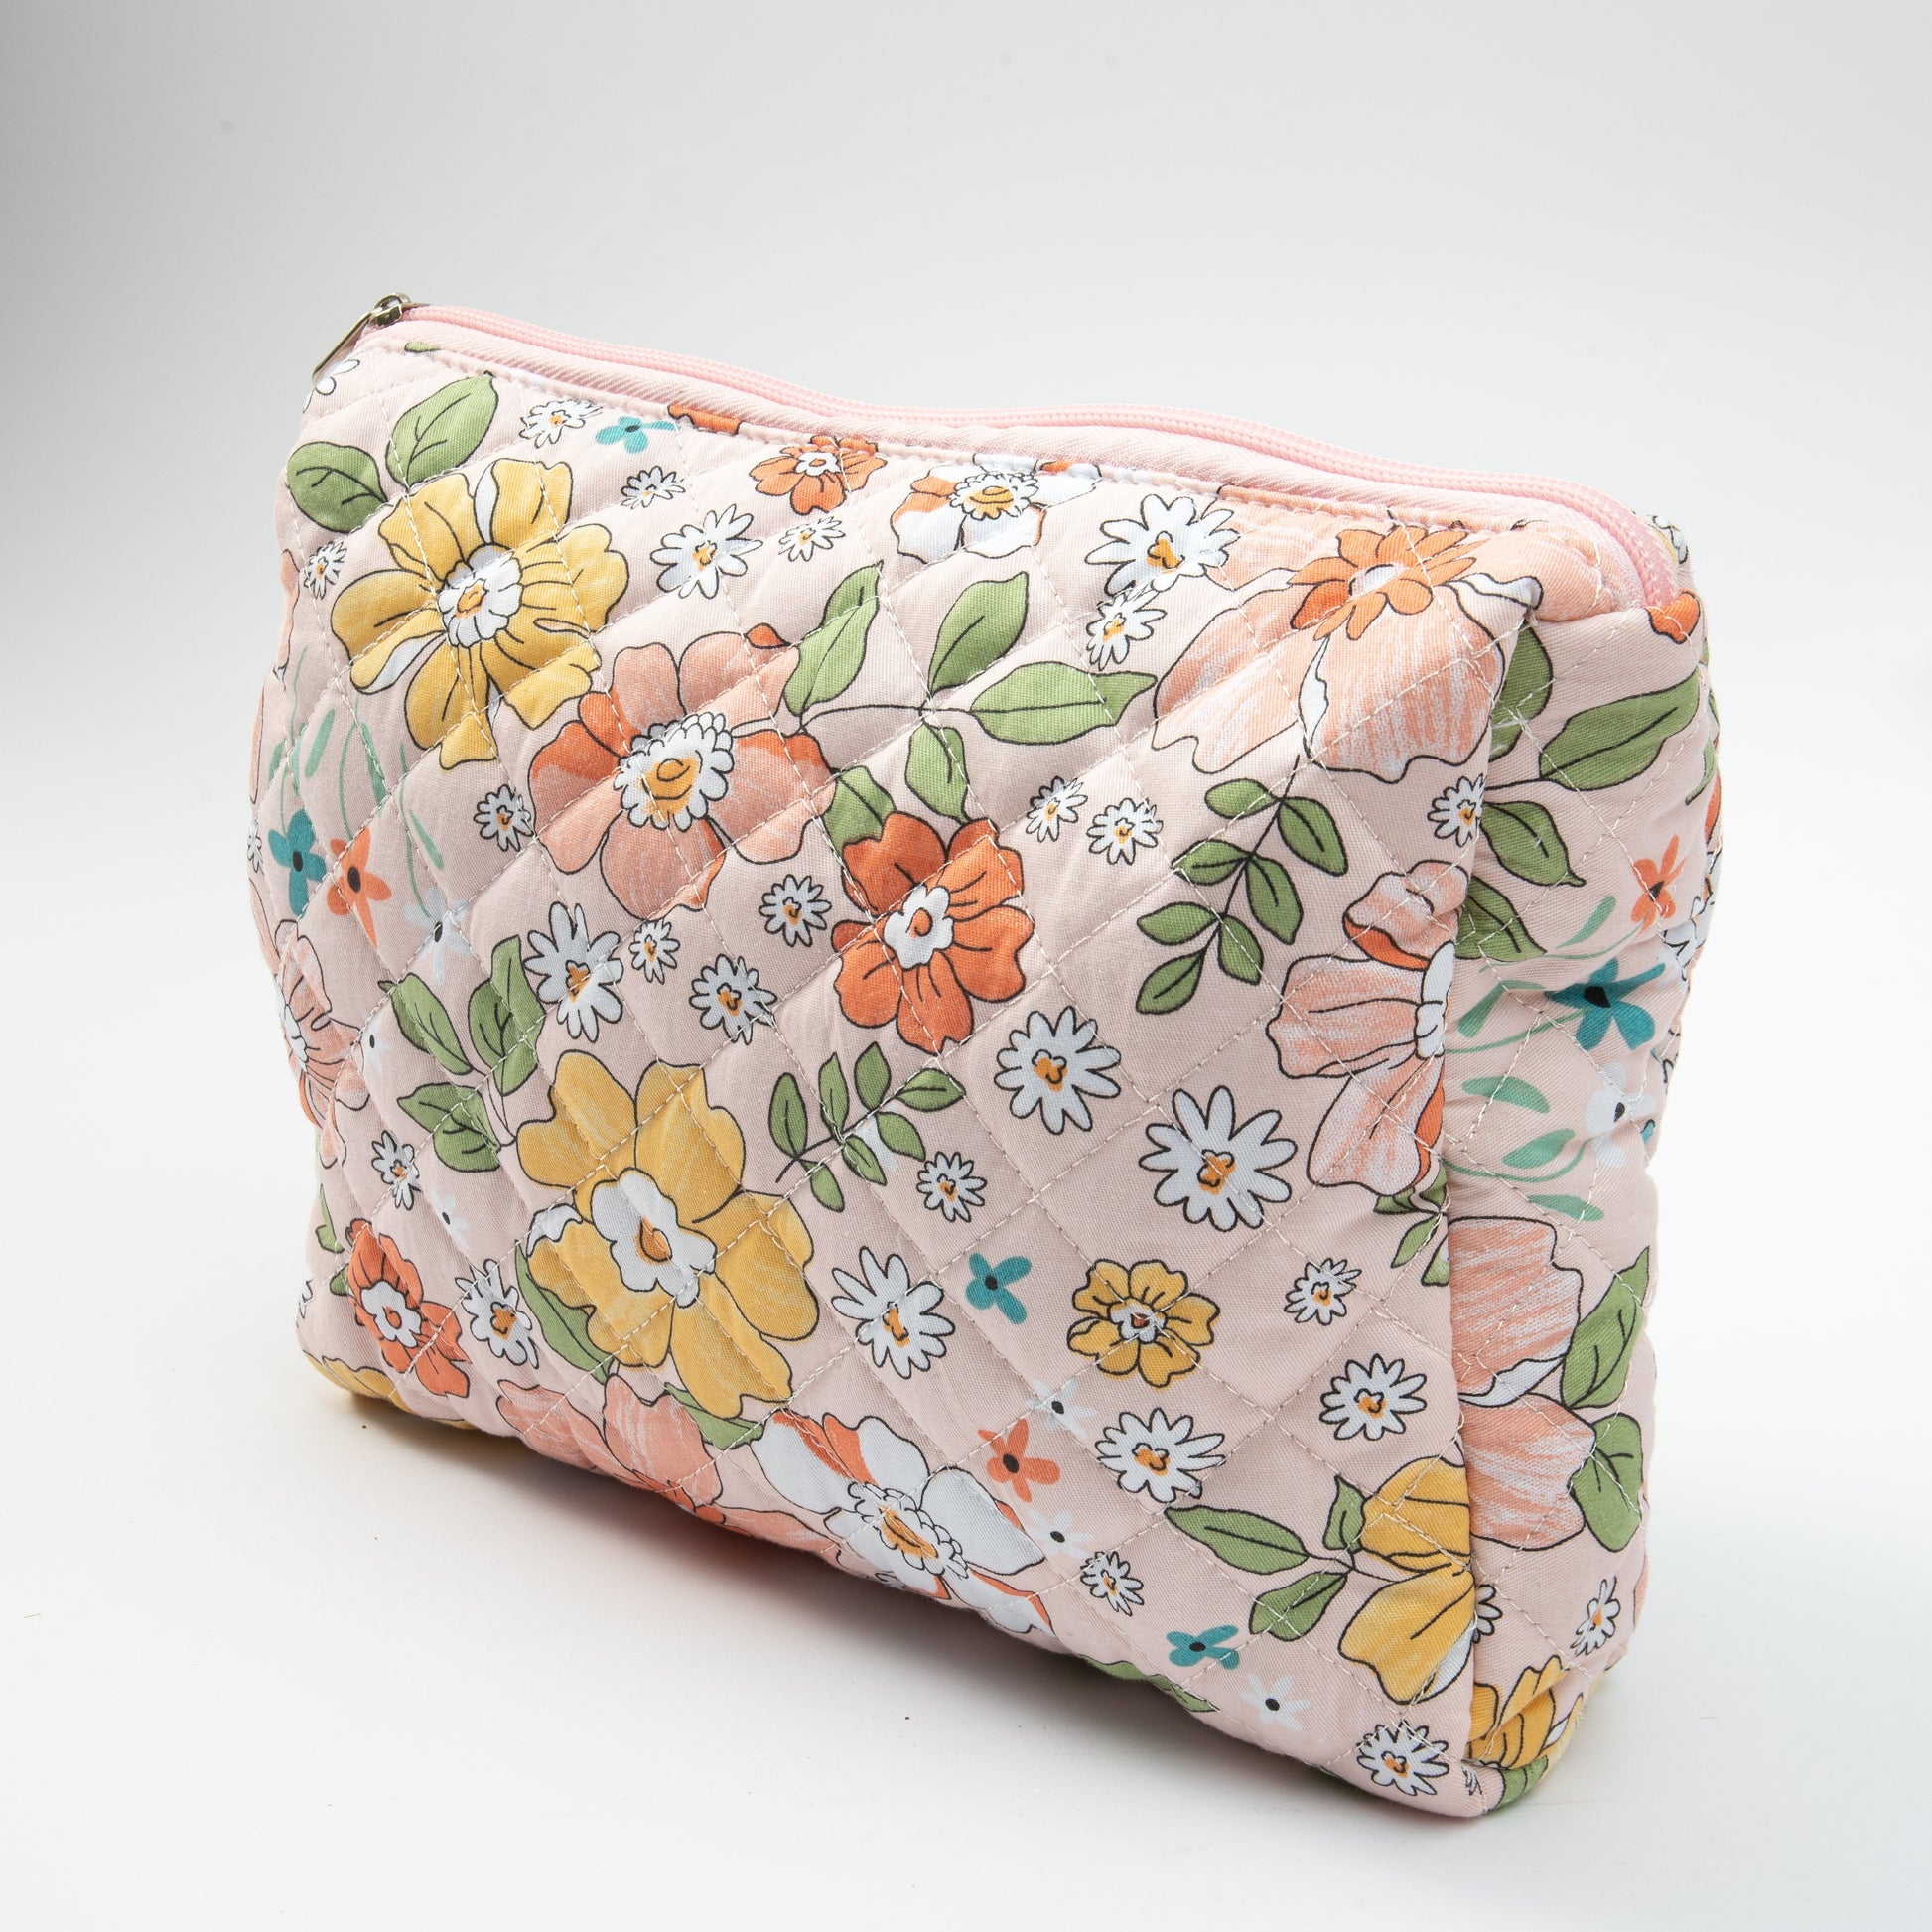 Travel Pouch - Buy Multipurpose Quilted Vanity Pouch Online